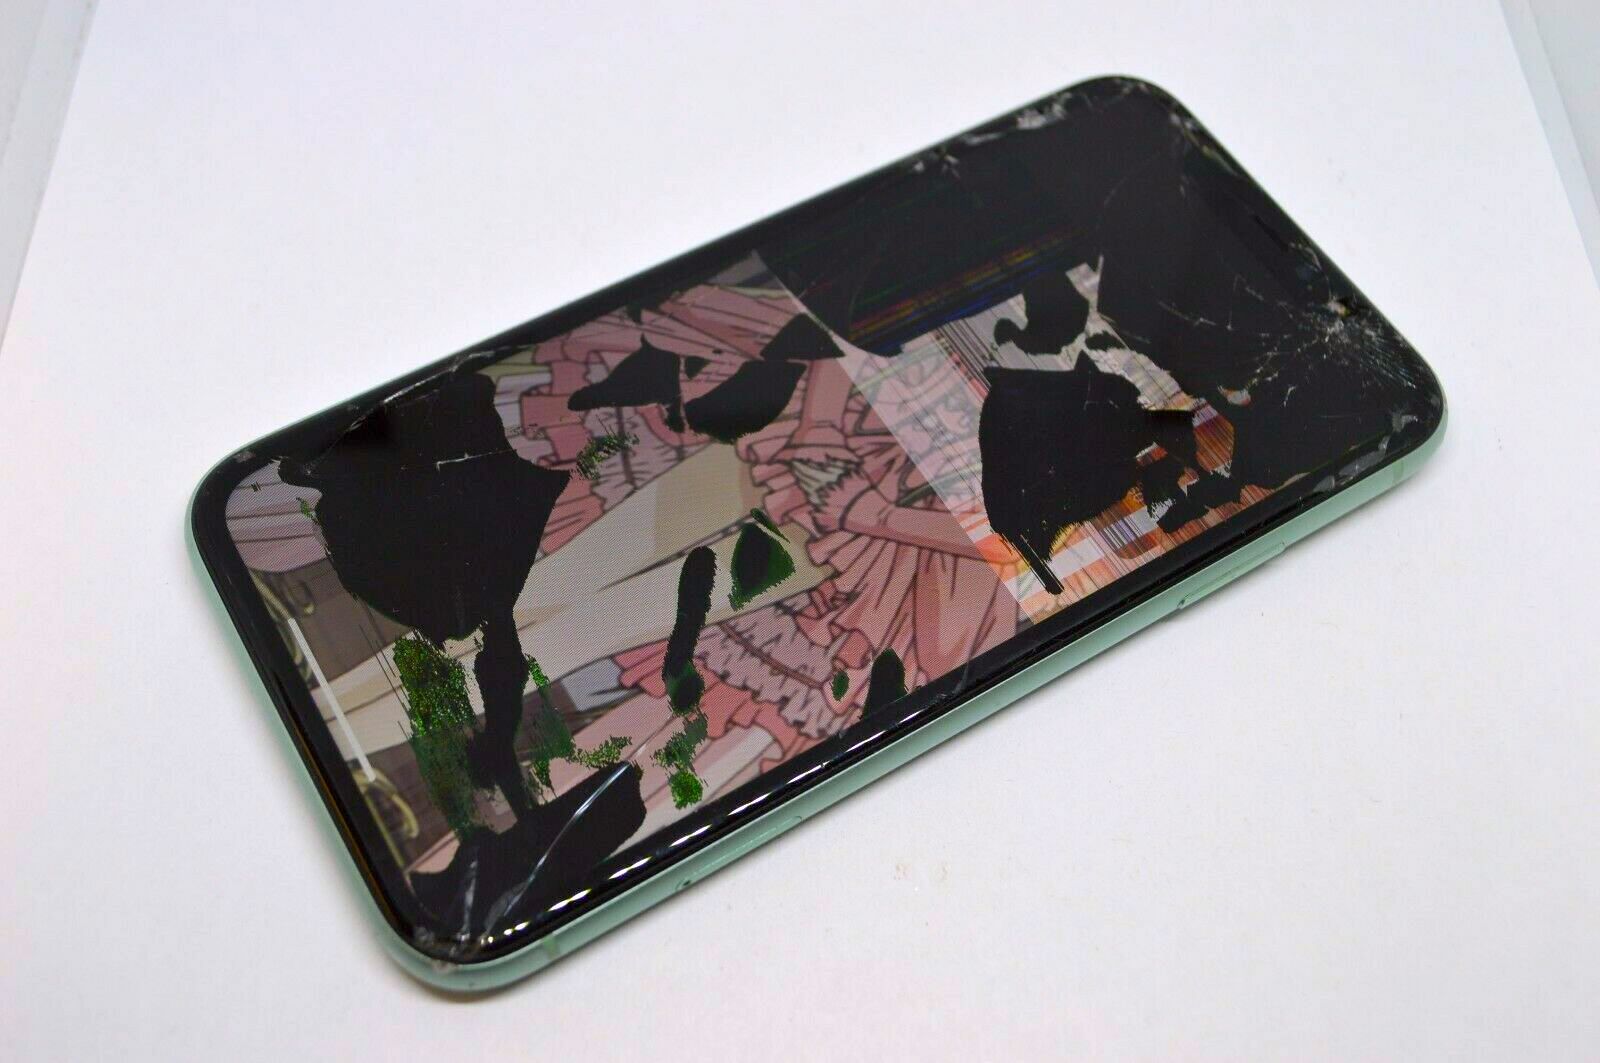 How much does it cost to repair a broken iPhone 11 screen?